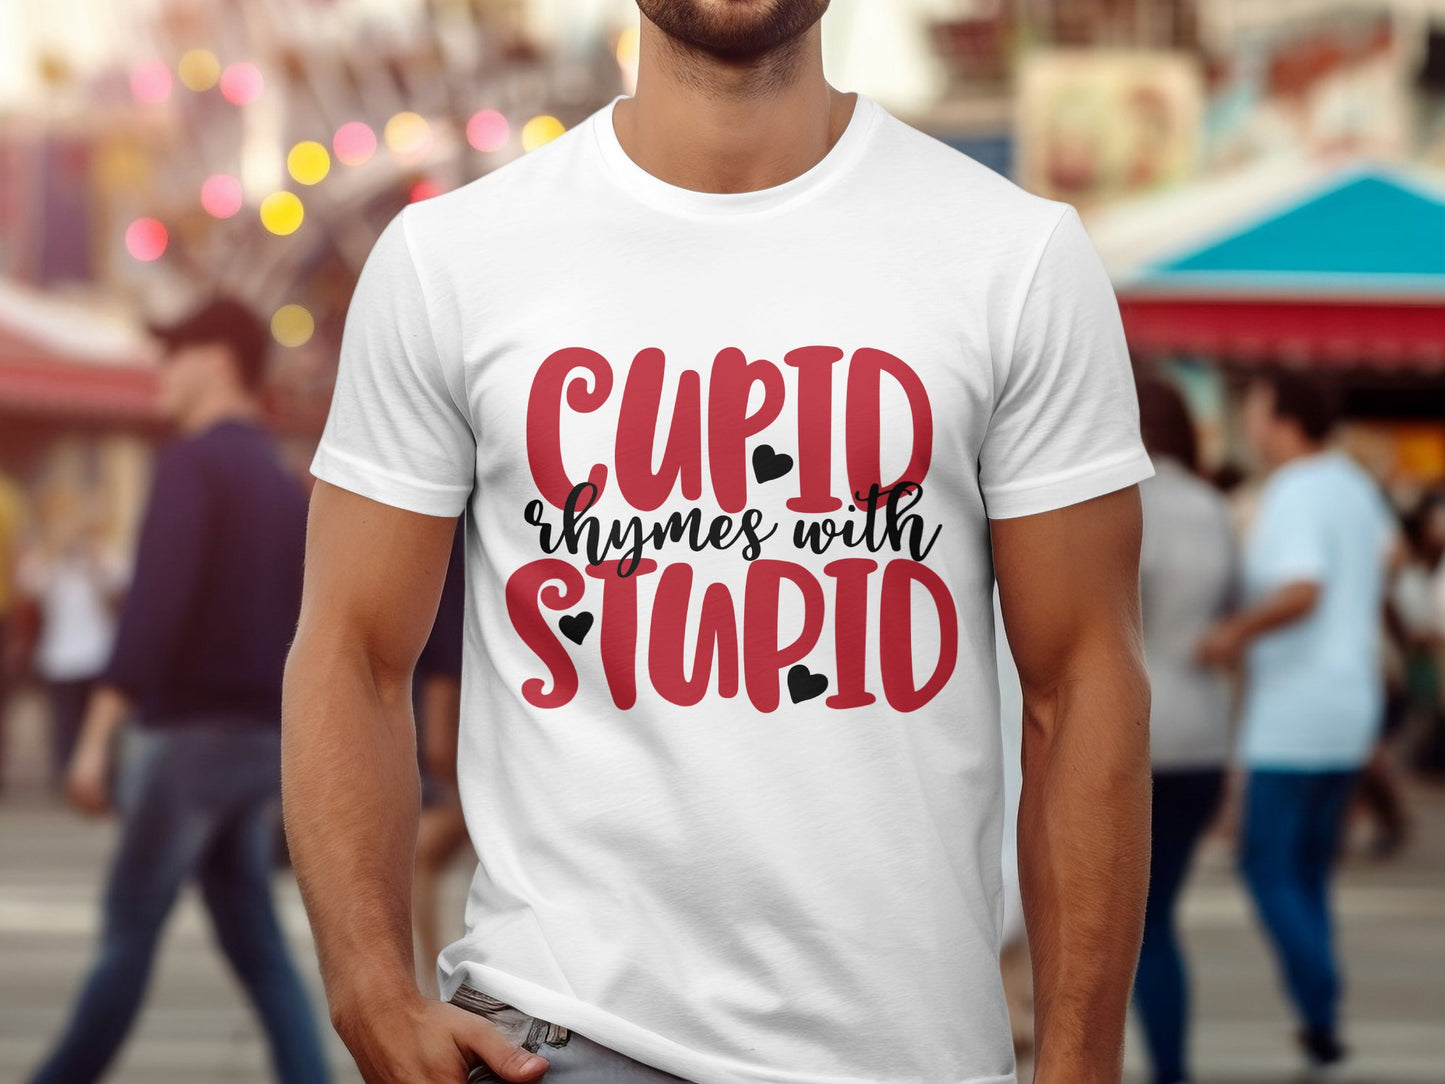 CUPID RHYMES WITH STUPID (Valentine T-shirt)